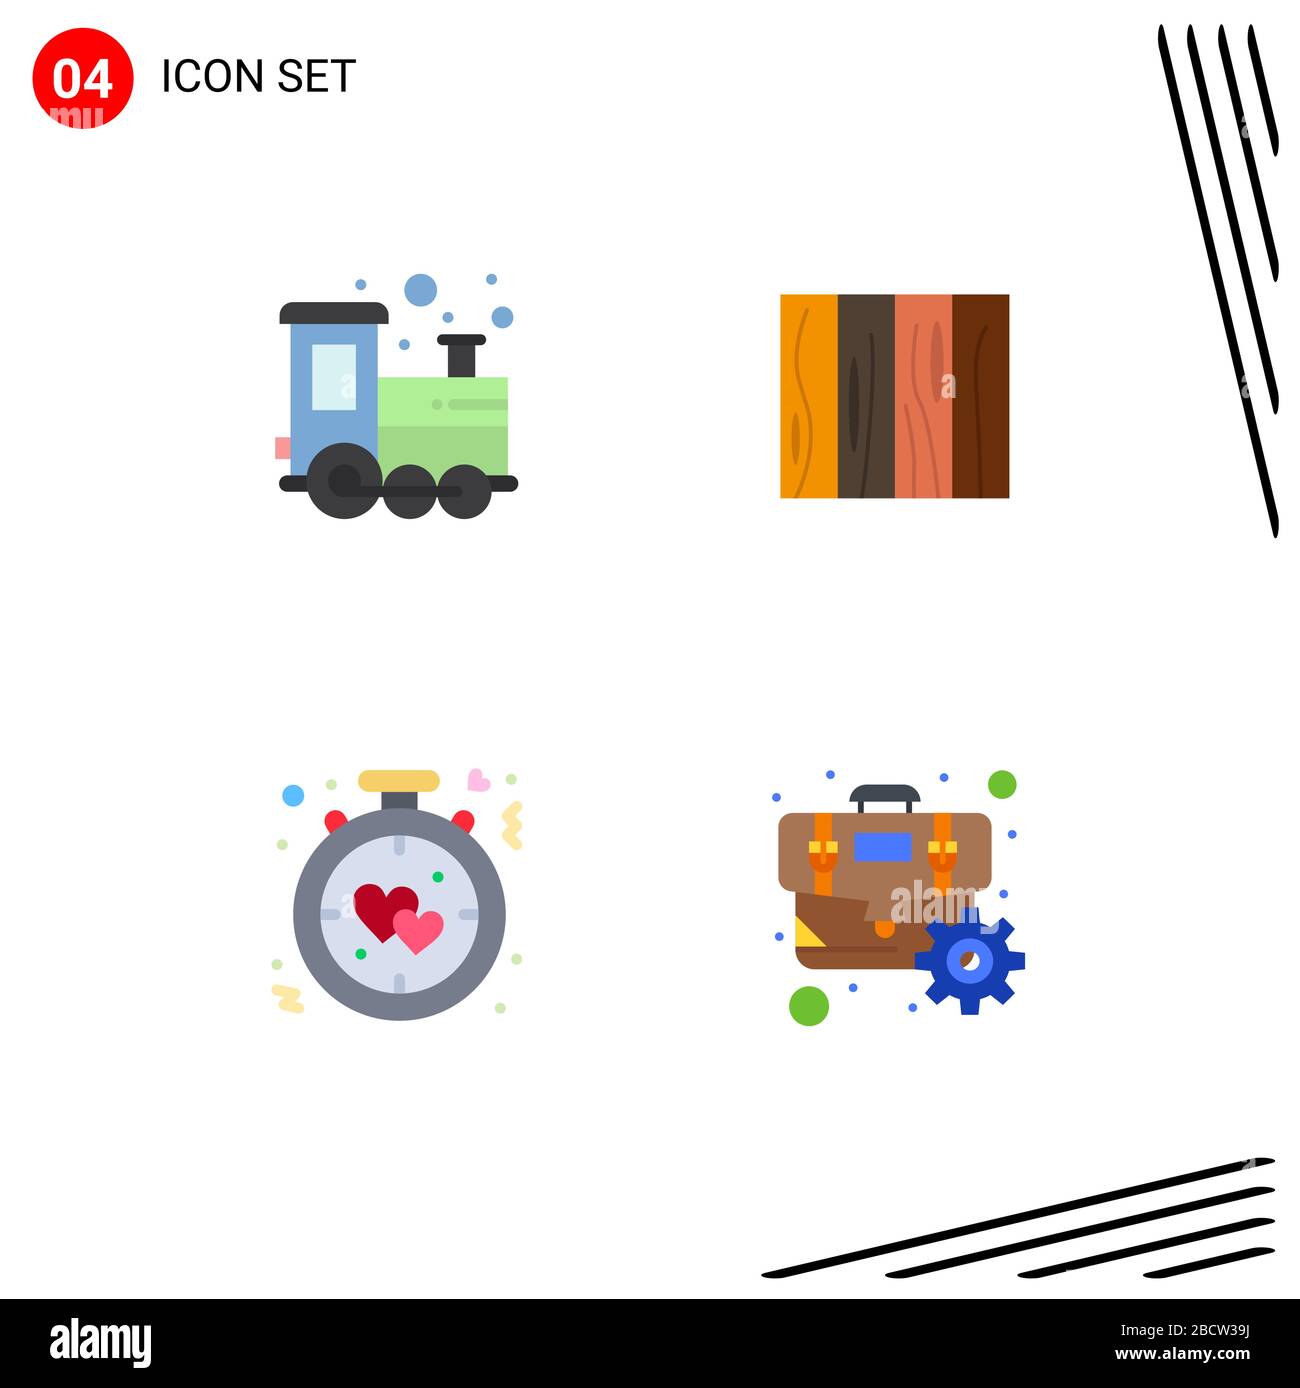 Set of 4 Vector Flat Icons on Grid for baby, texture, play time, interior, heart Editable Vector Design Elements Stock Vector